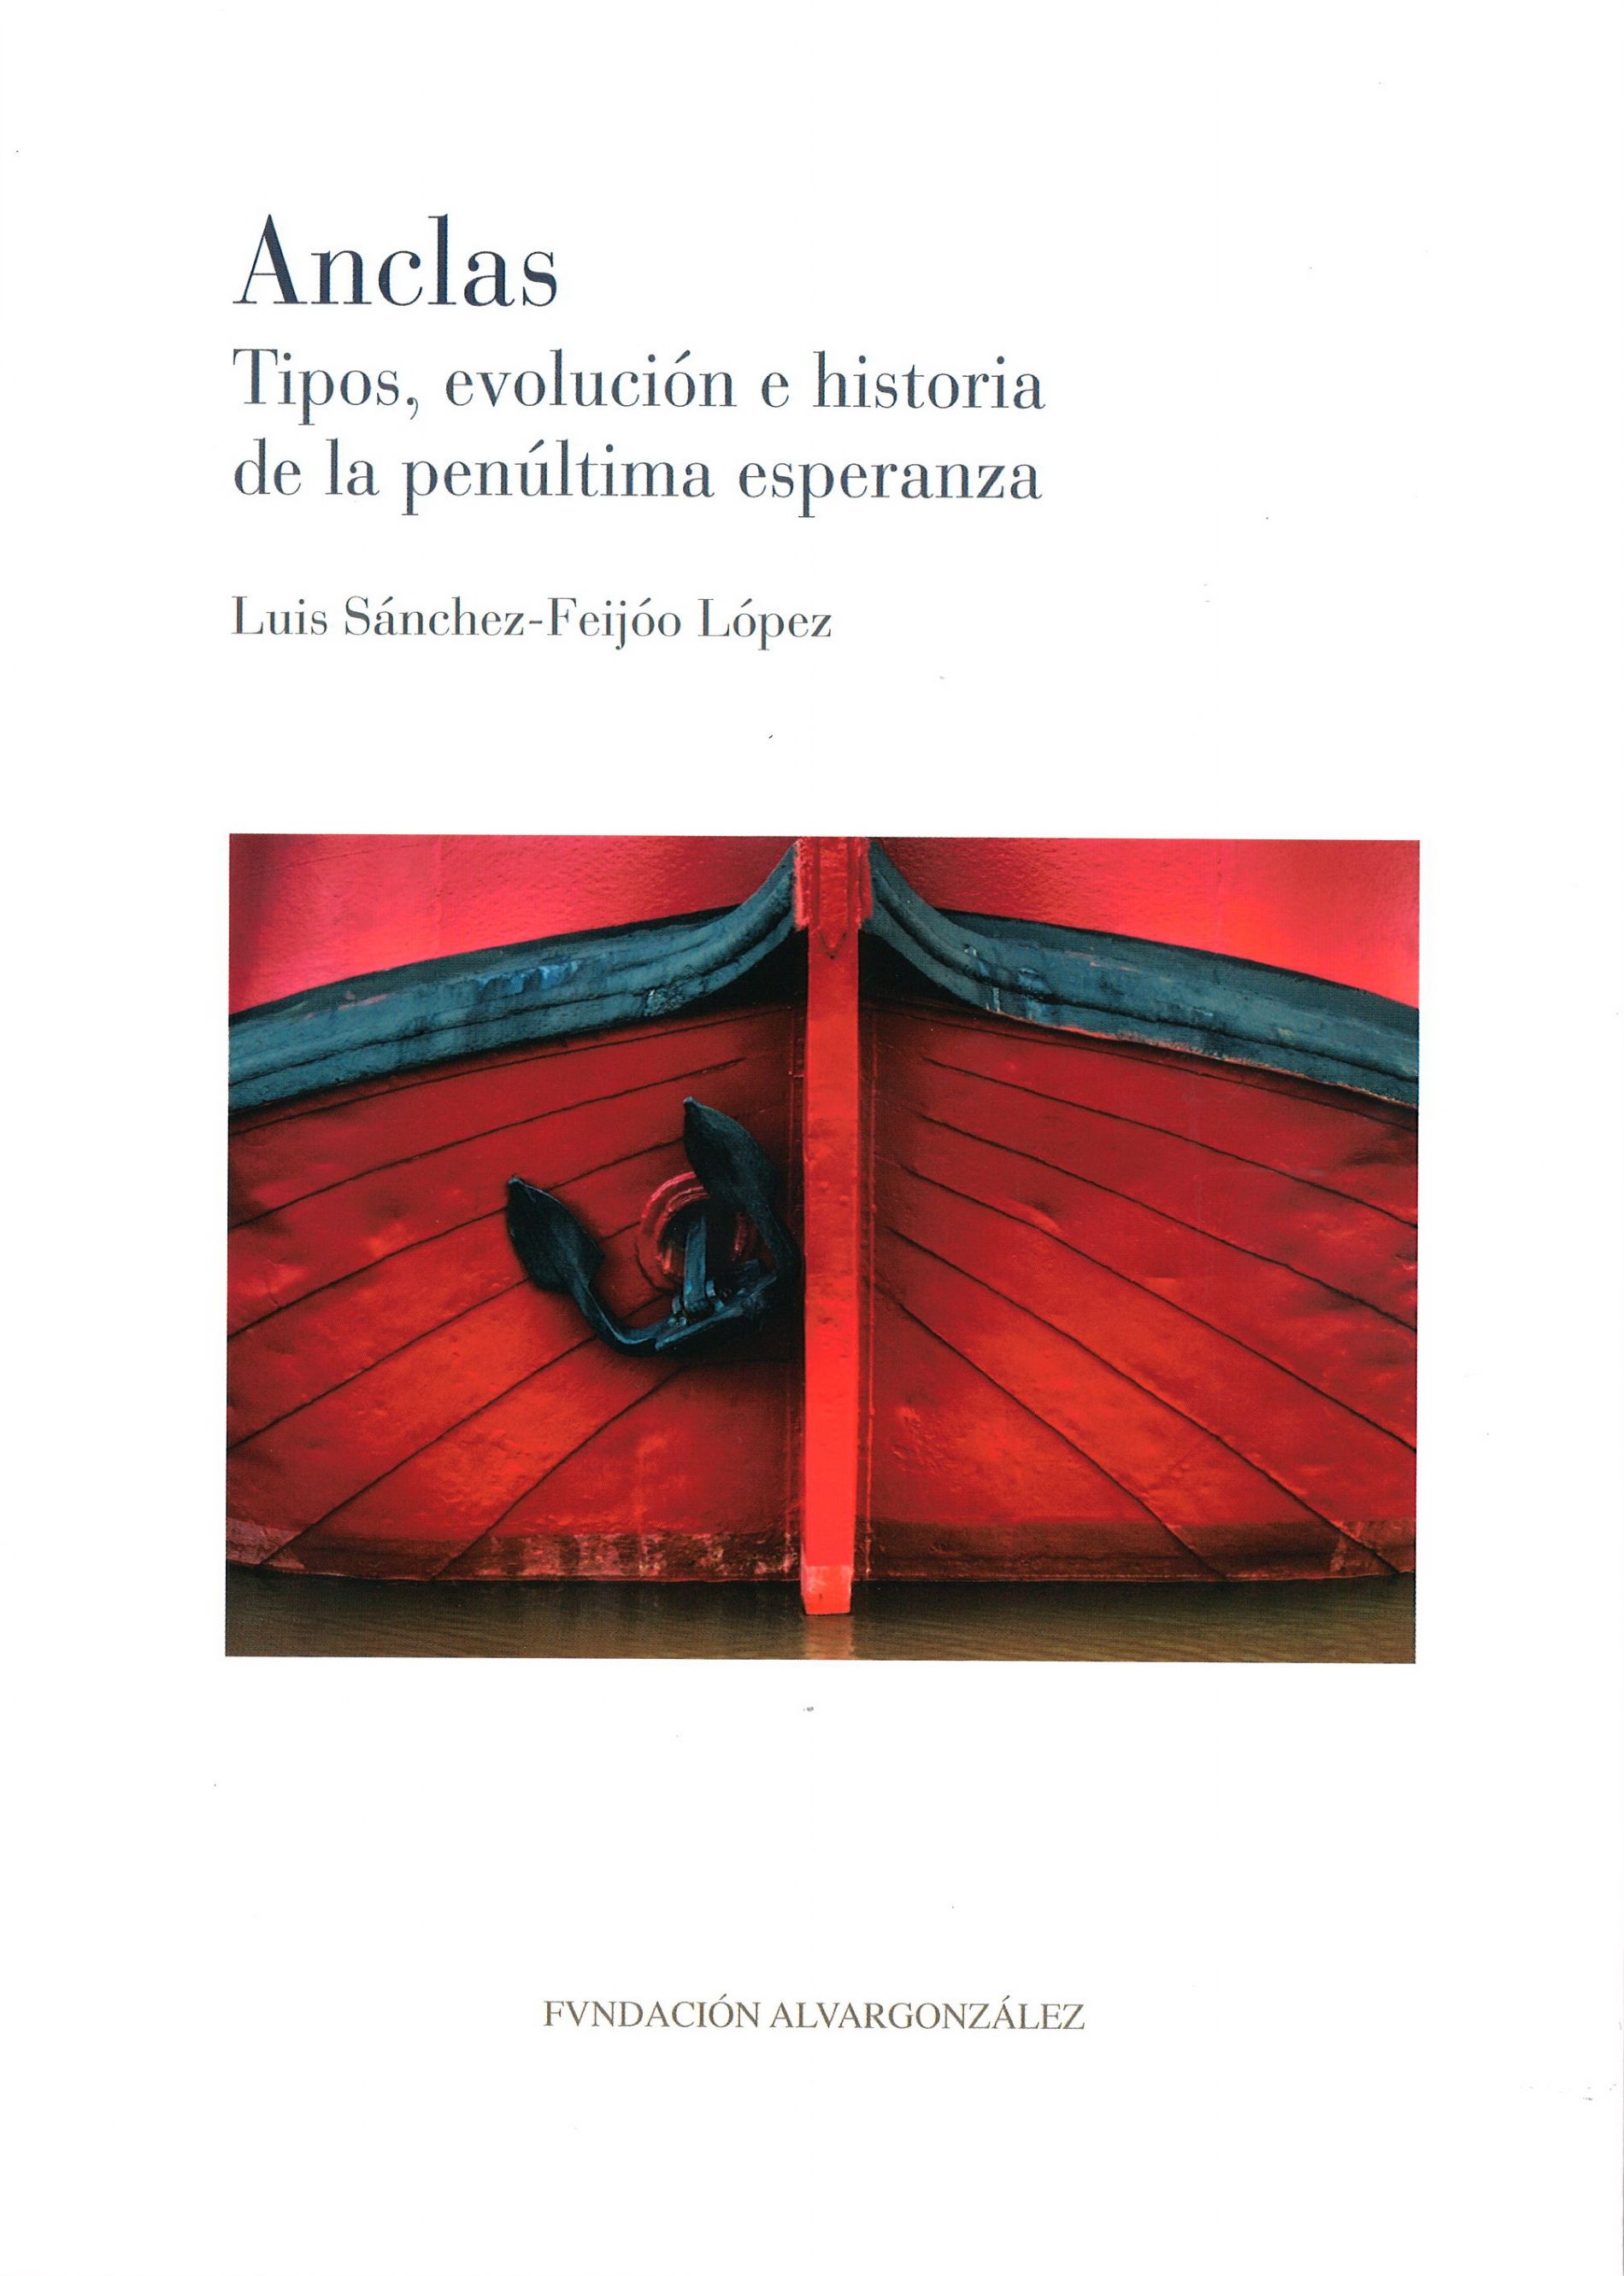 Anclas. Tipos, evolucin e historia (Anchors. Types, Development and History)